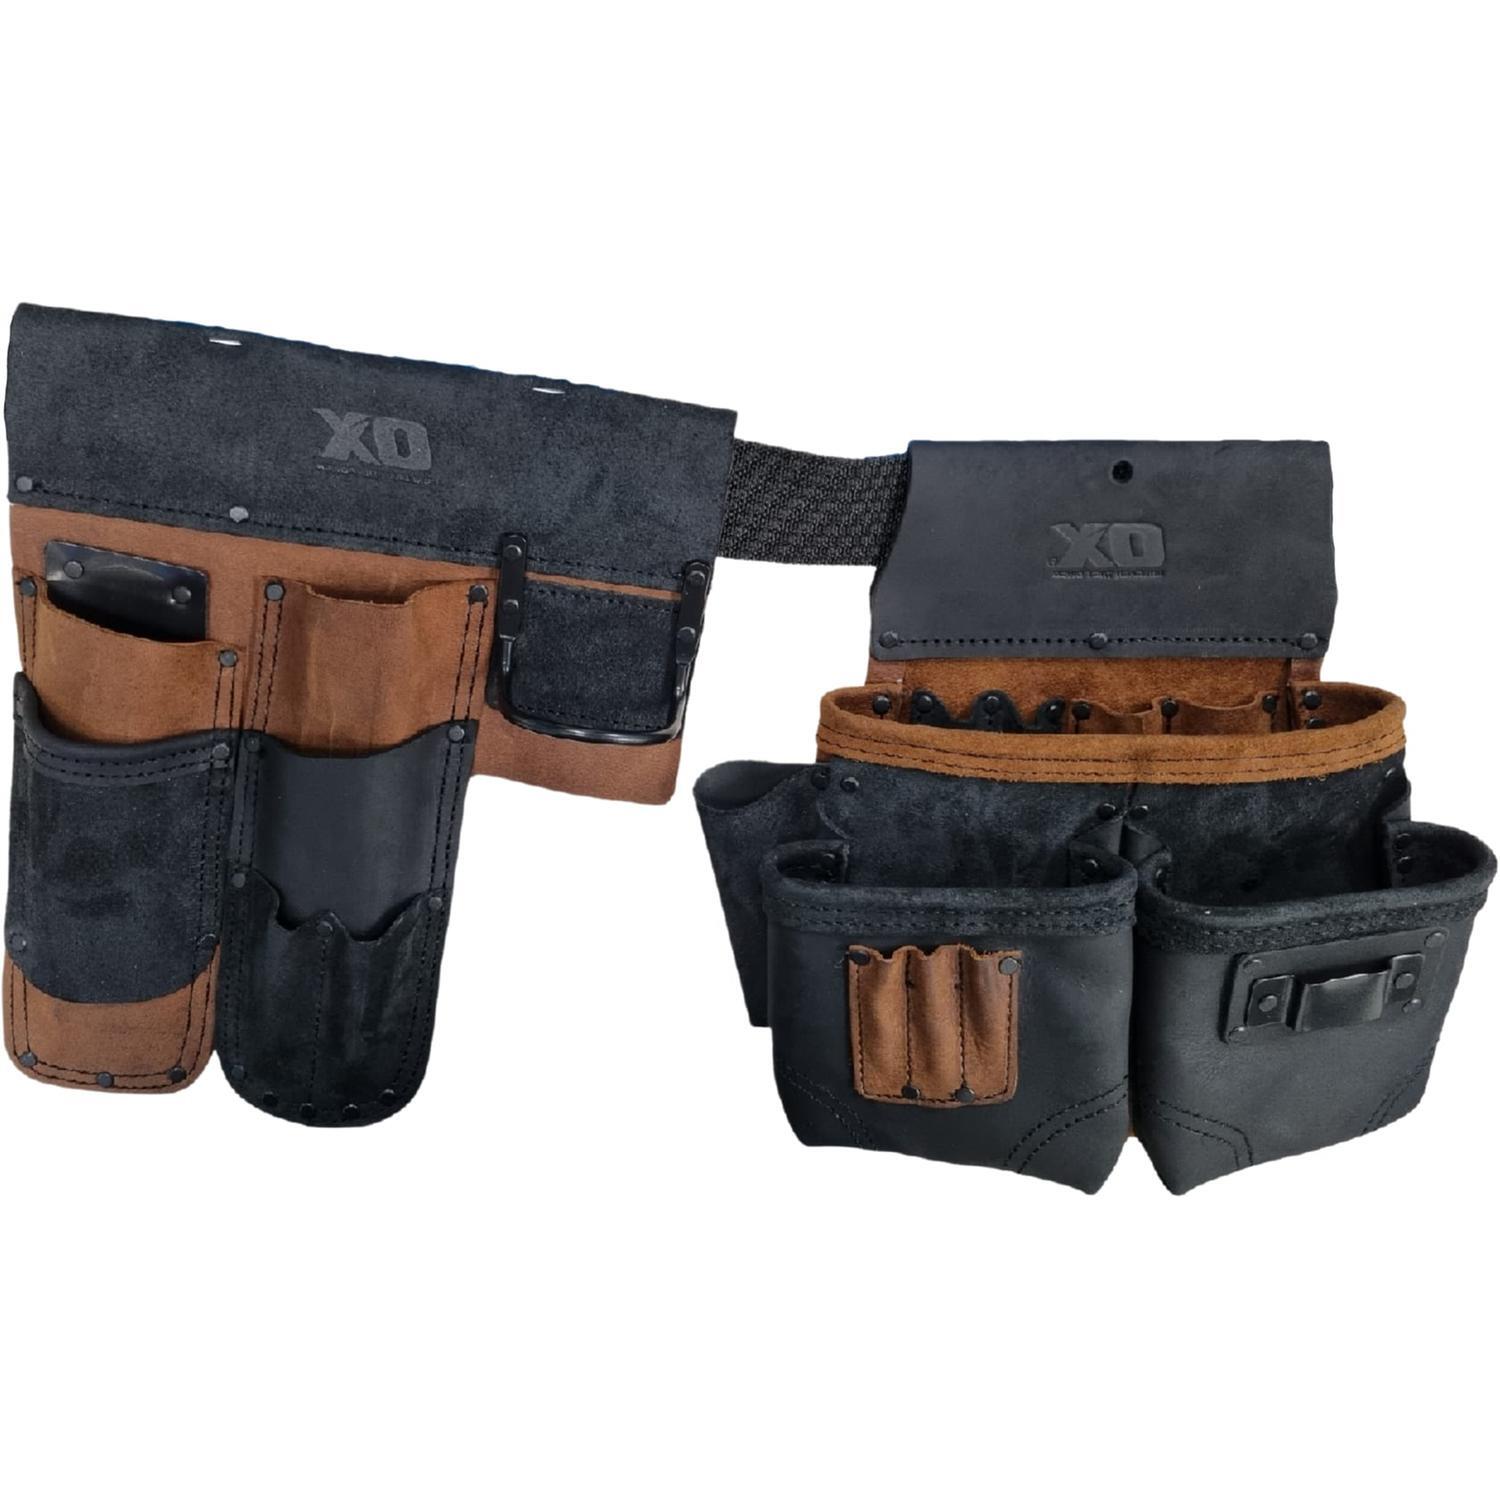 OX Pro 4-Piece Construction Rig - Oil-Tanned Leather